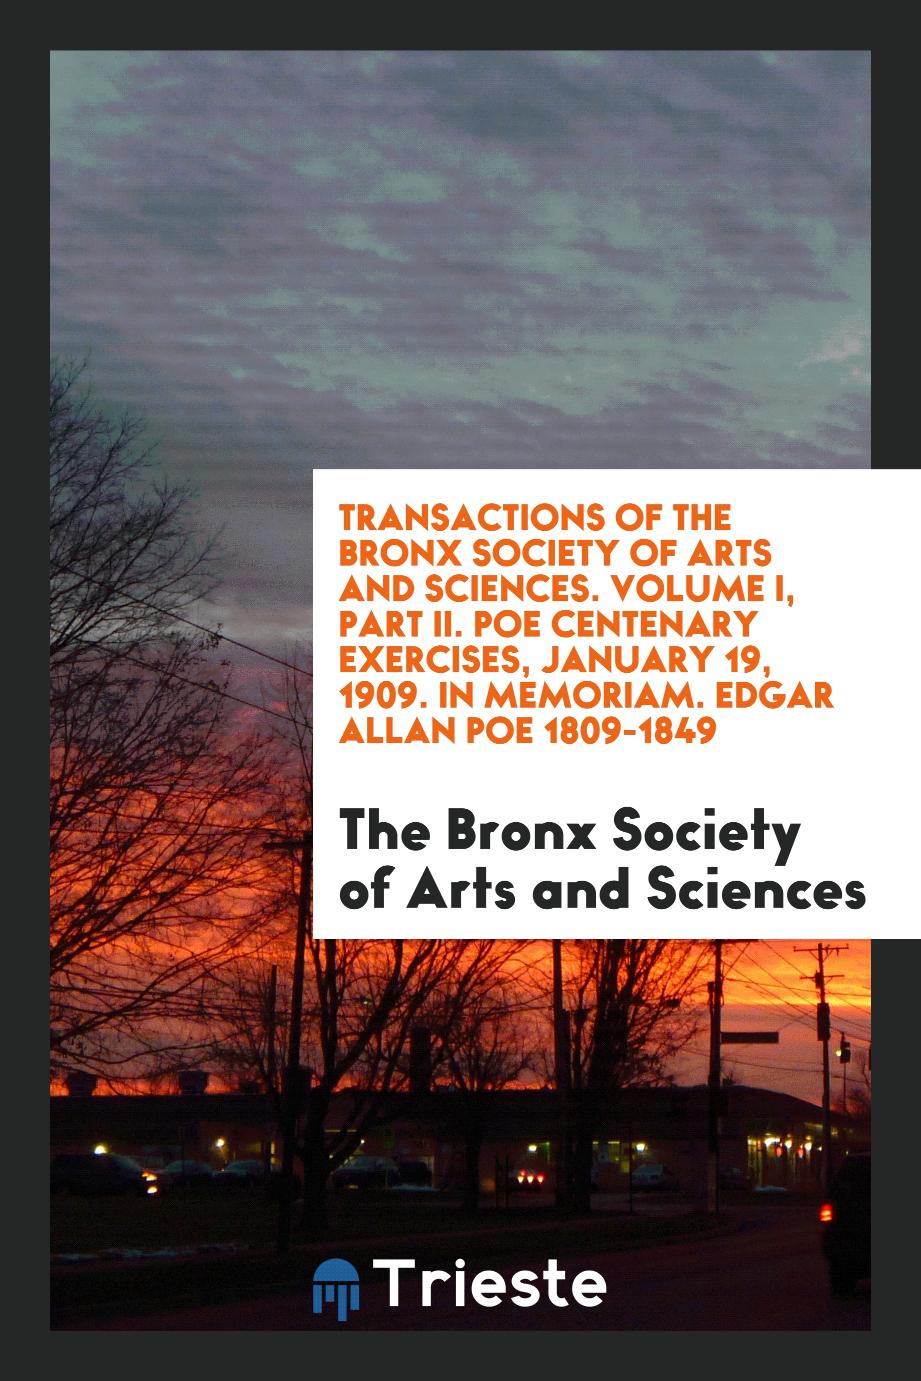 Transactions of the Bronx Society of Arts and sciences. Volume I, Part II. Poe Centenary Exercises, January 19, 1909. In Memoriam. Edgar Allan Poe 1809-1849